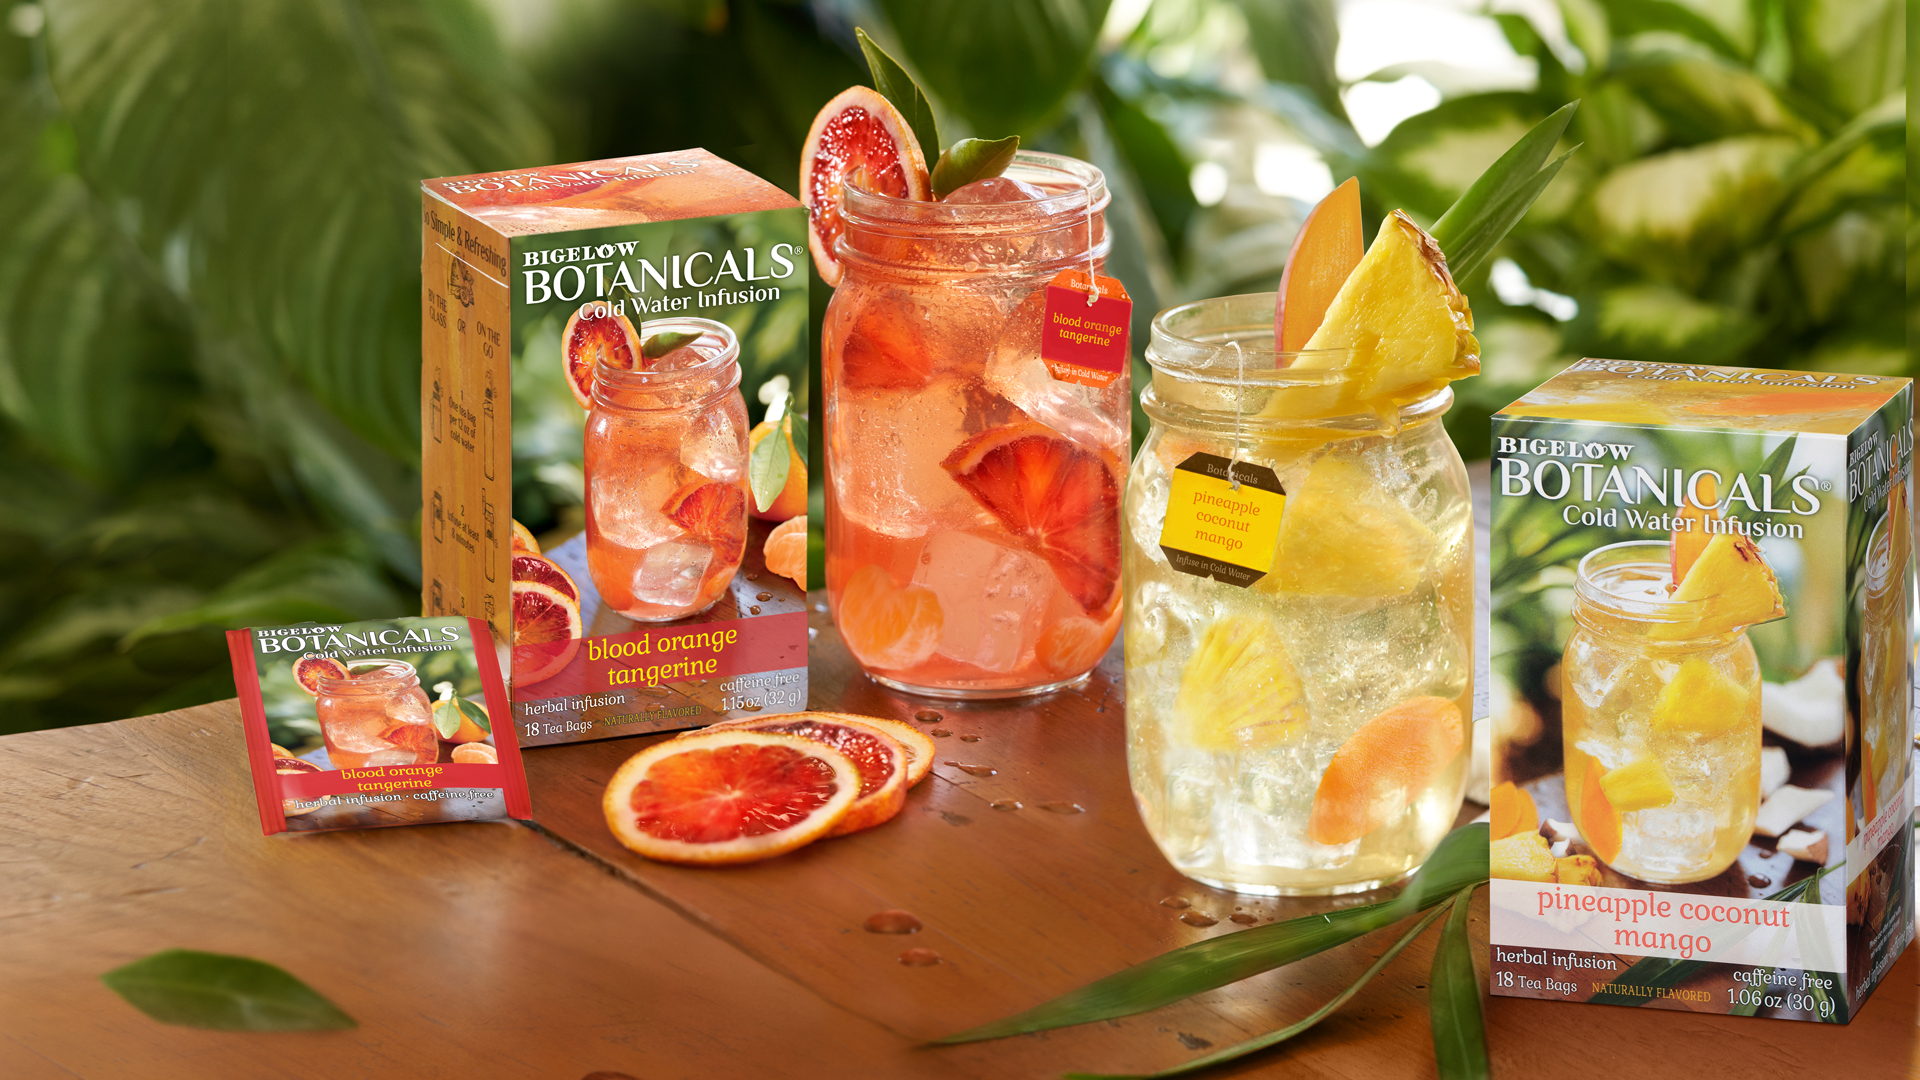 Bigelow Tea Launches Two Botanical Cold Water Infusions: Blood Orange Tangerine & Pineapple Coconut Mango